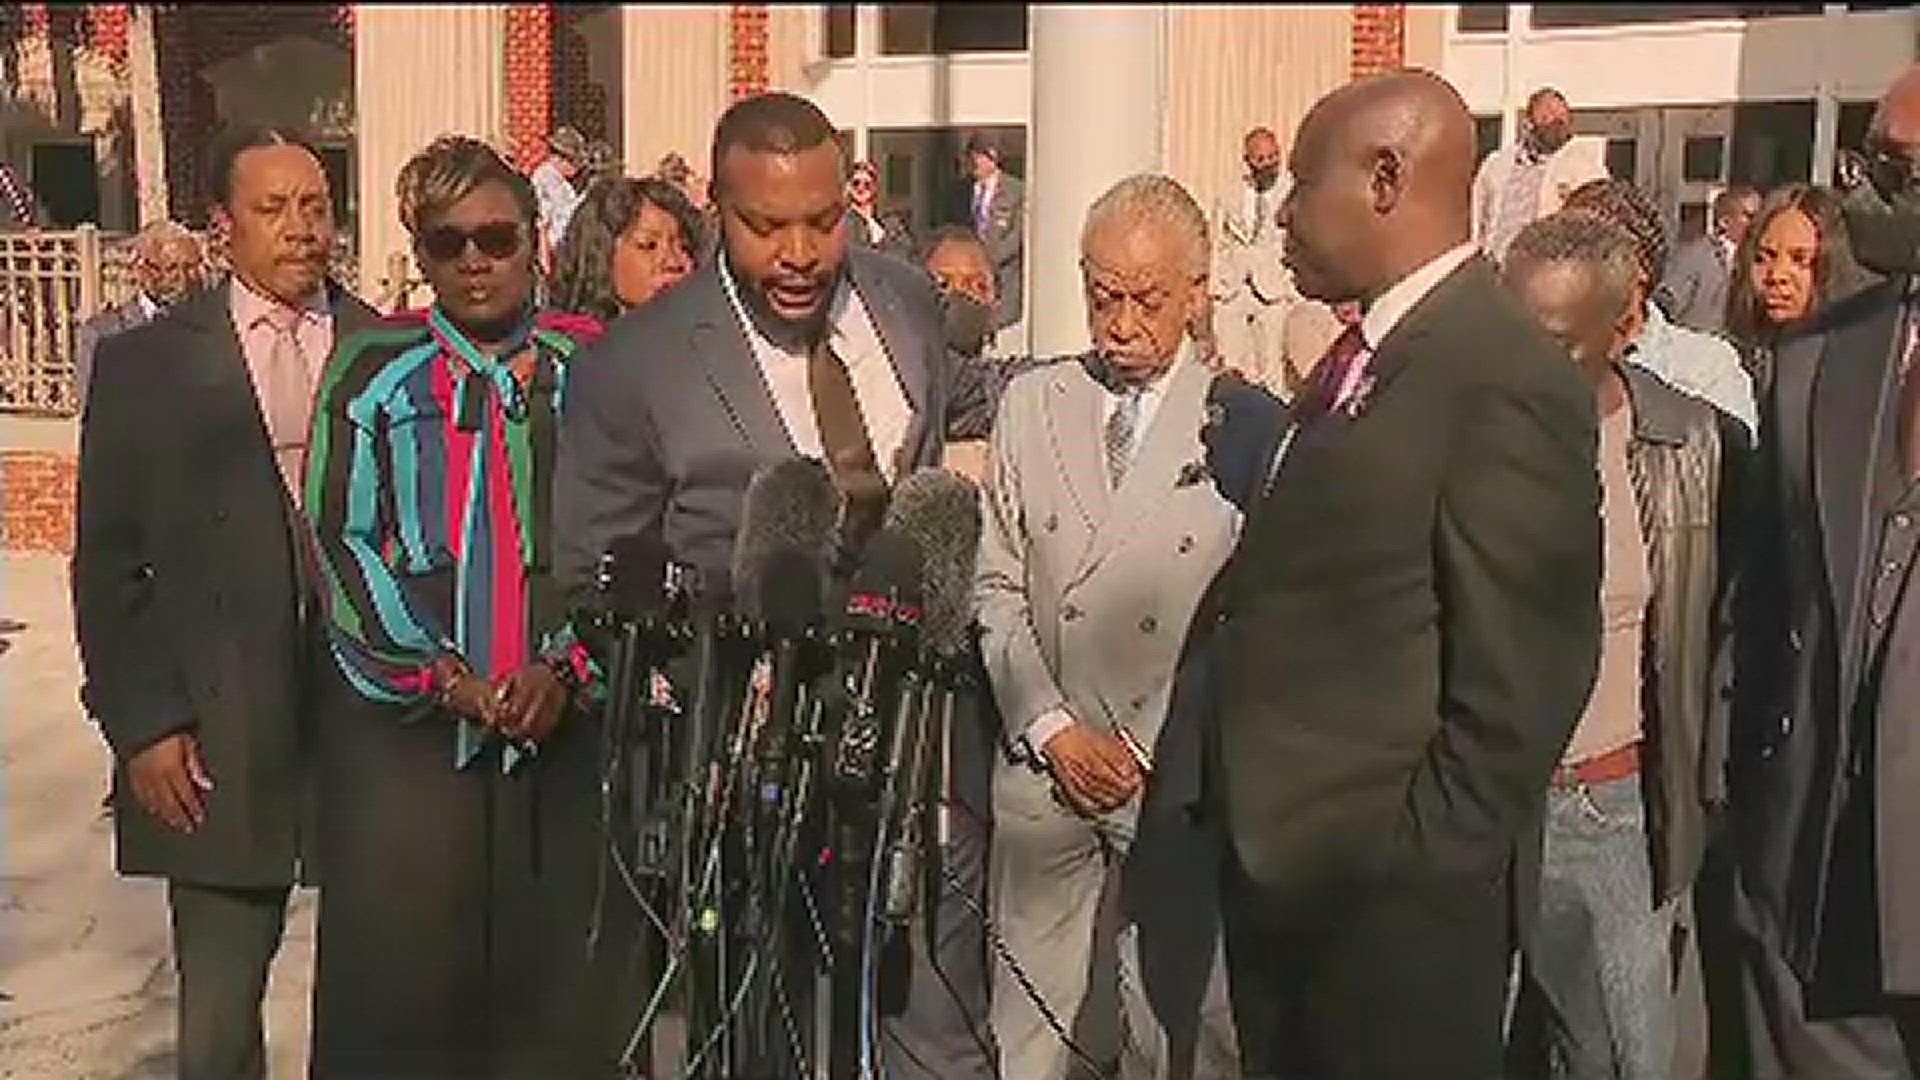 Rev. Al Sharpton spoke outside the courthouse on Wednesday as the jury in the trial of the killing of Ahmaud Arbery continued deliberations.